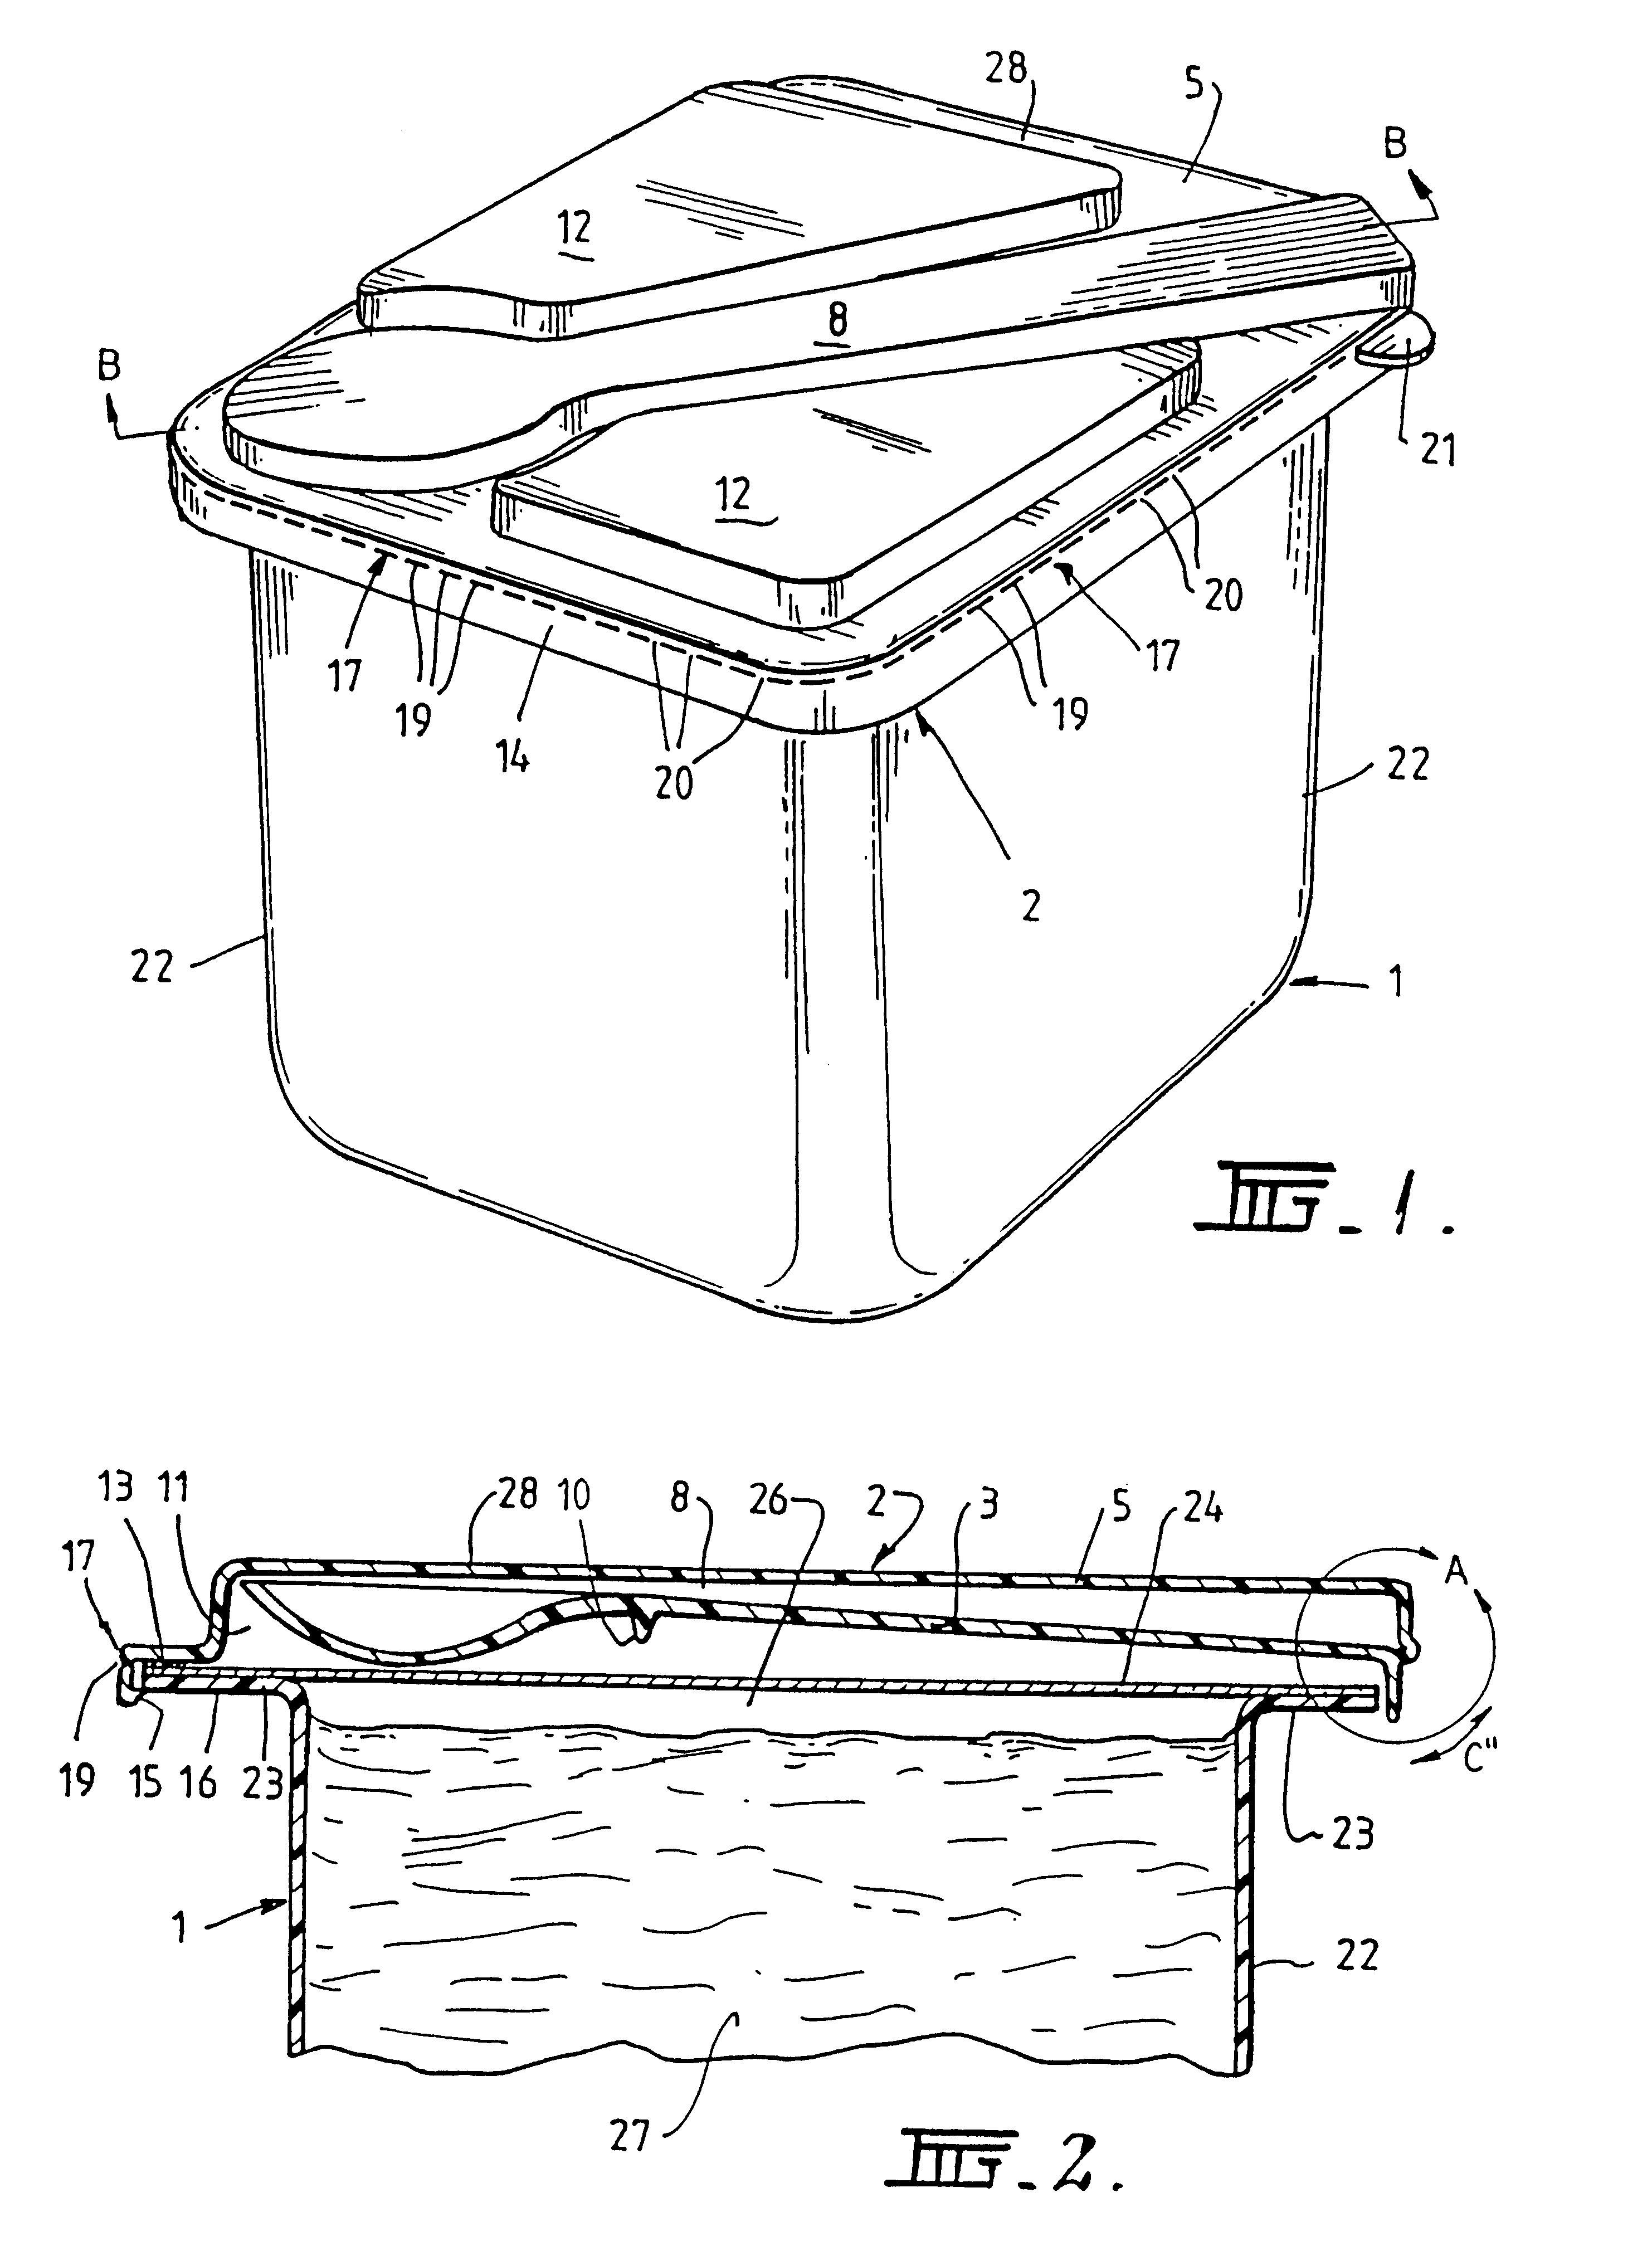 Container lid and implement